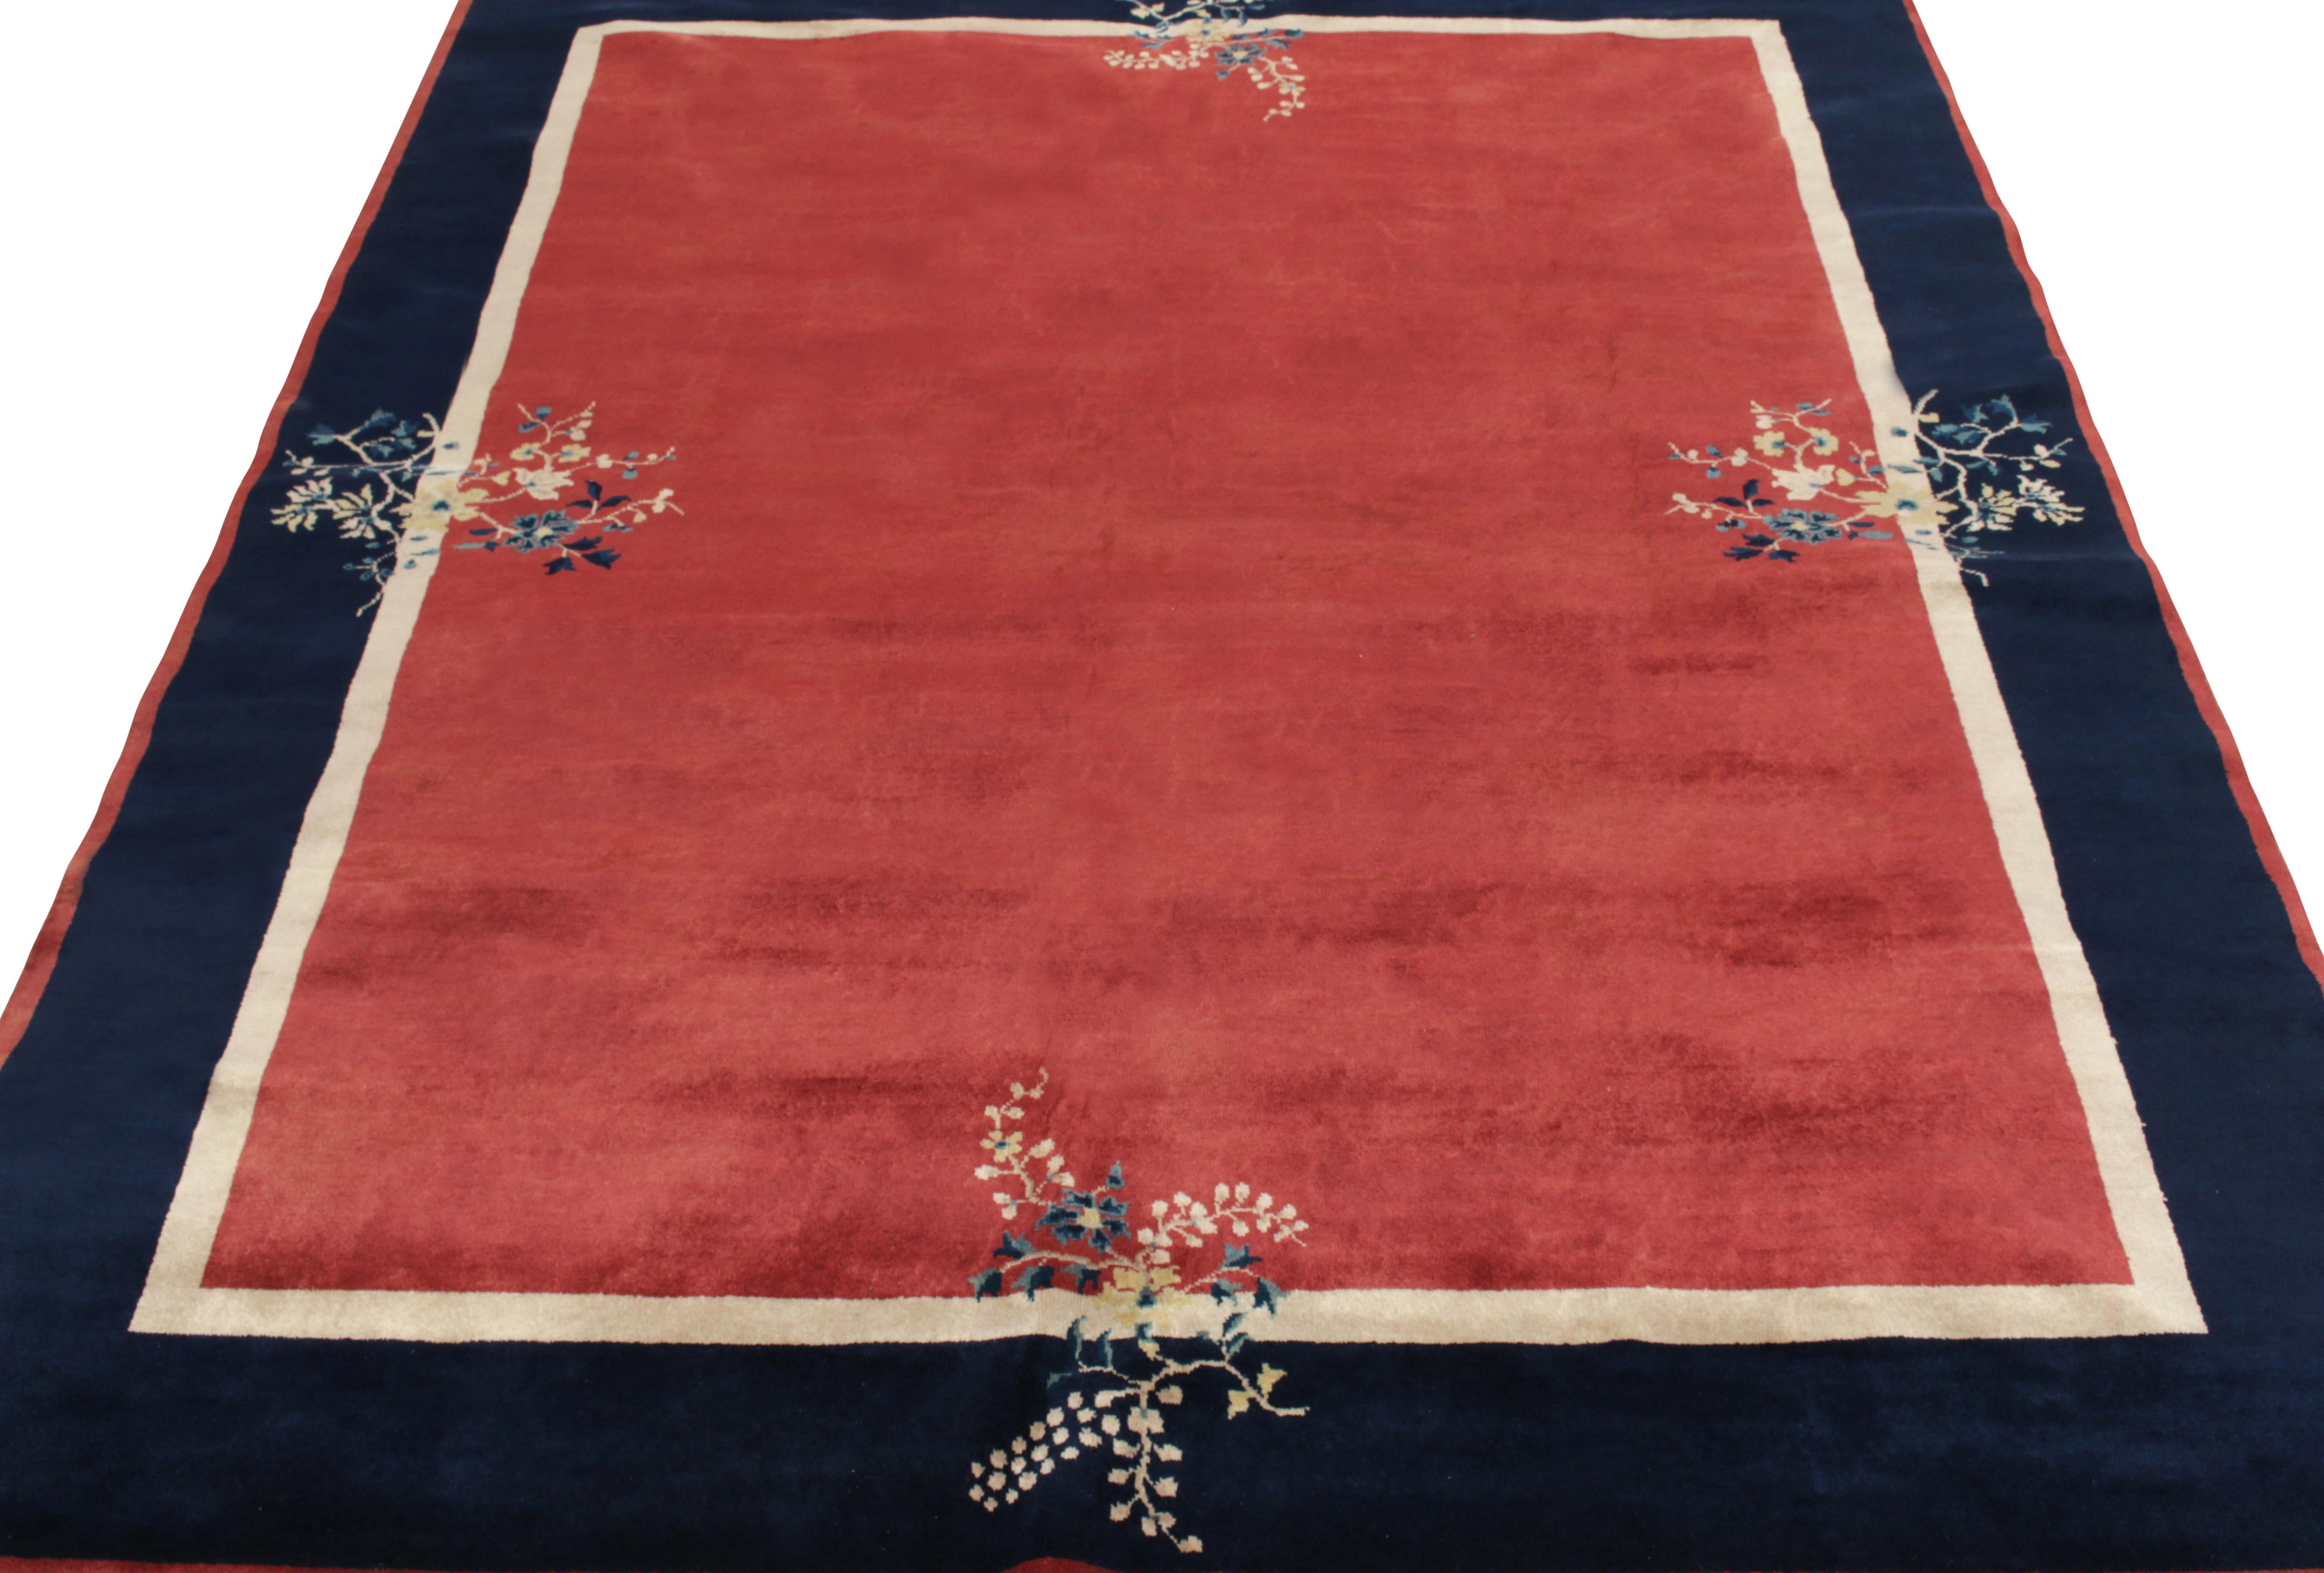 Hand-knotted in wool, an 8 x 10 vintage ode to Chinese art deco rugs from a new line in our Antique & Vintage collection—inspired by classic sensibilities of the 1920s. The rug enjoys a healthy pile in a light red with mild light and dark spots on